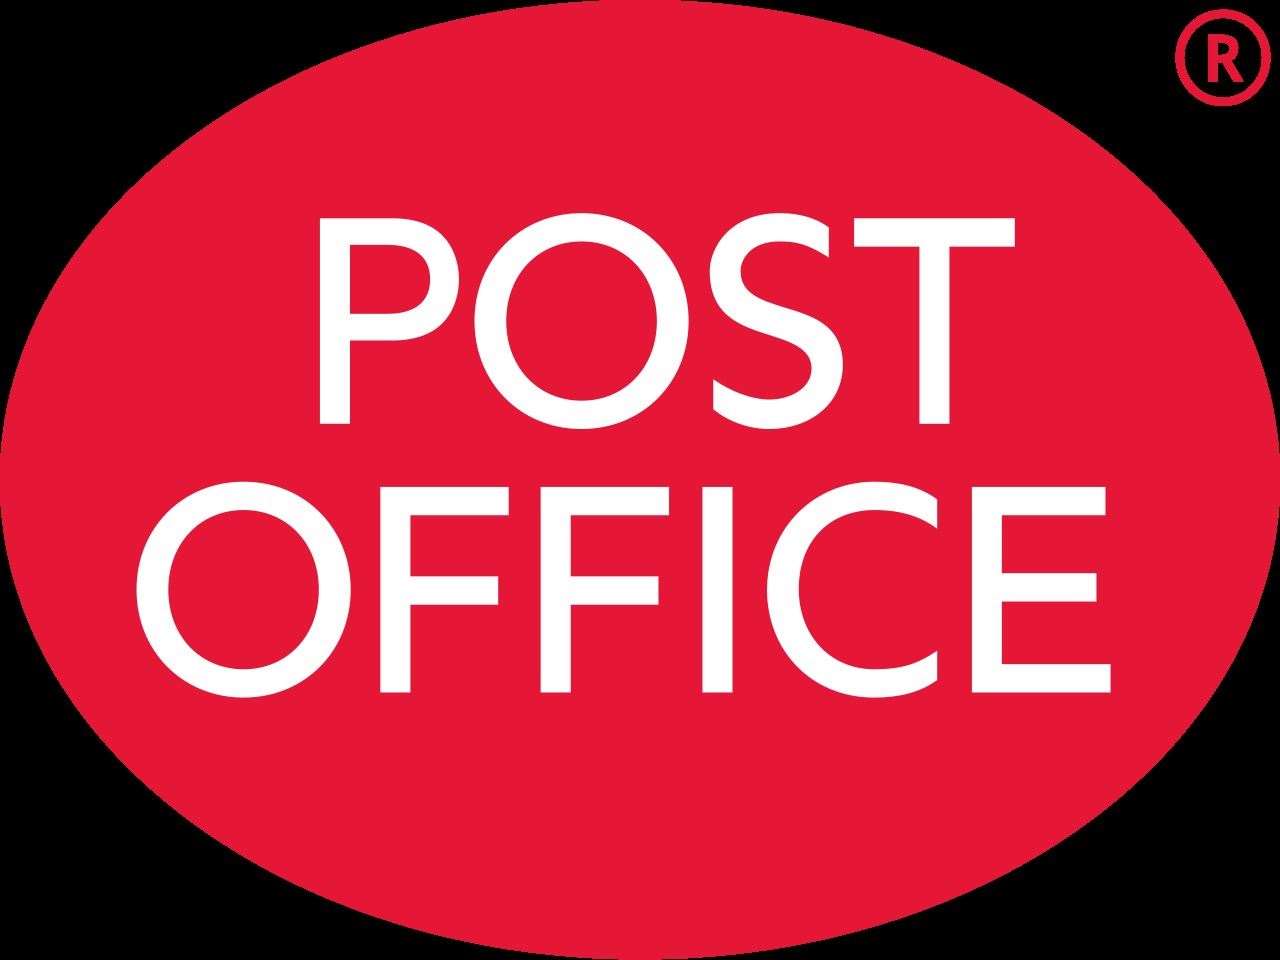 Faversham's post office will be benefitting from longer opening hours. Picture: Post Office